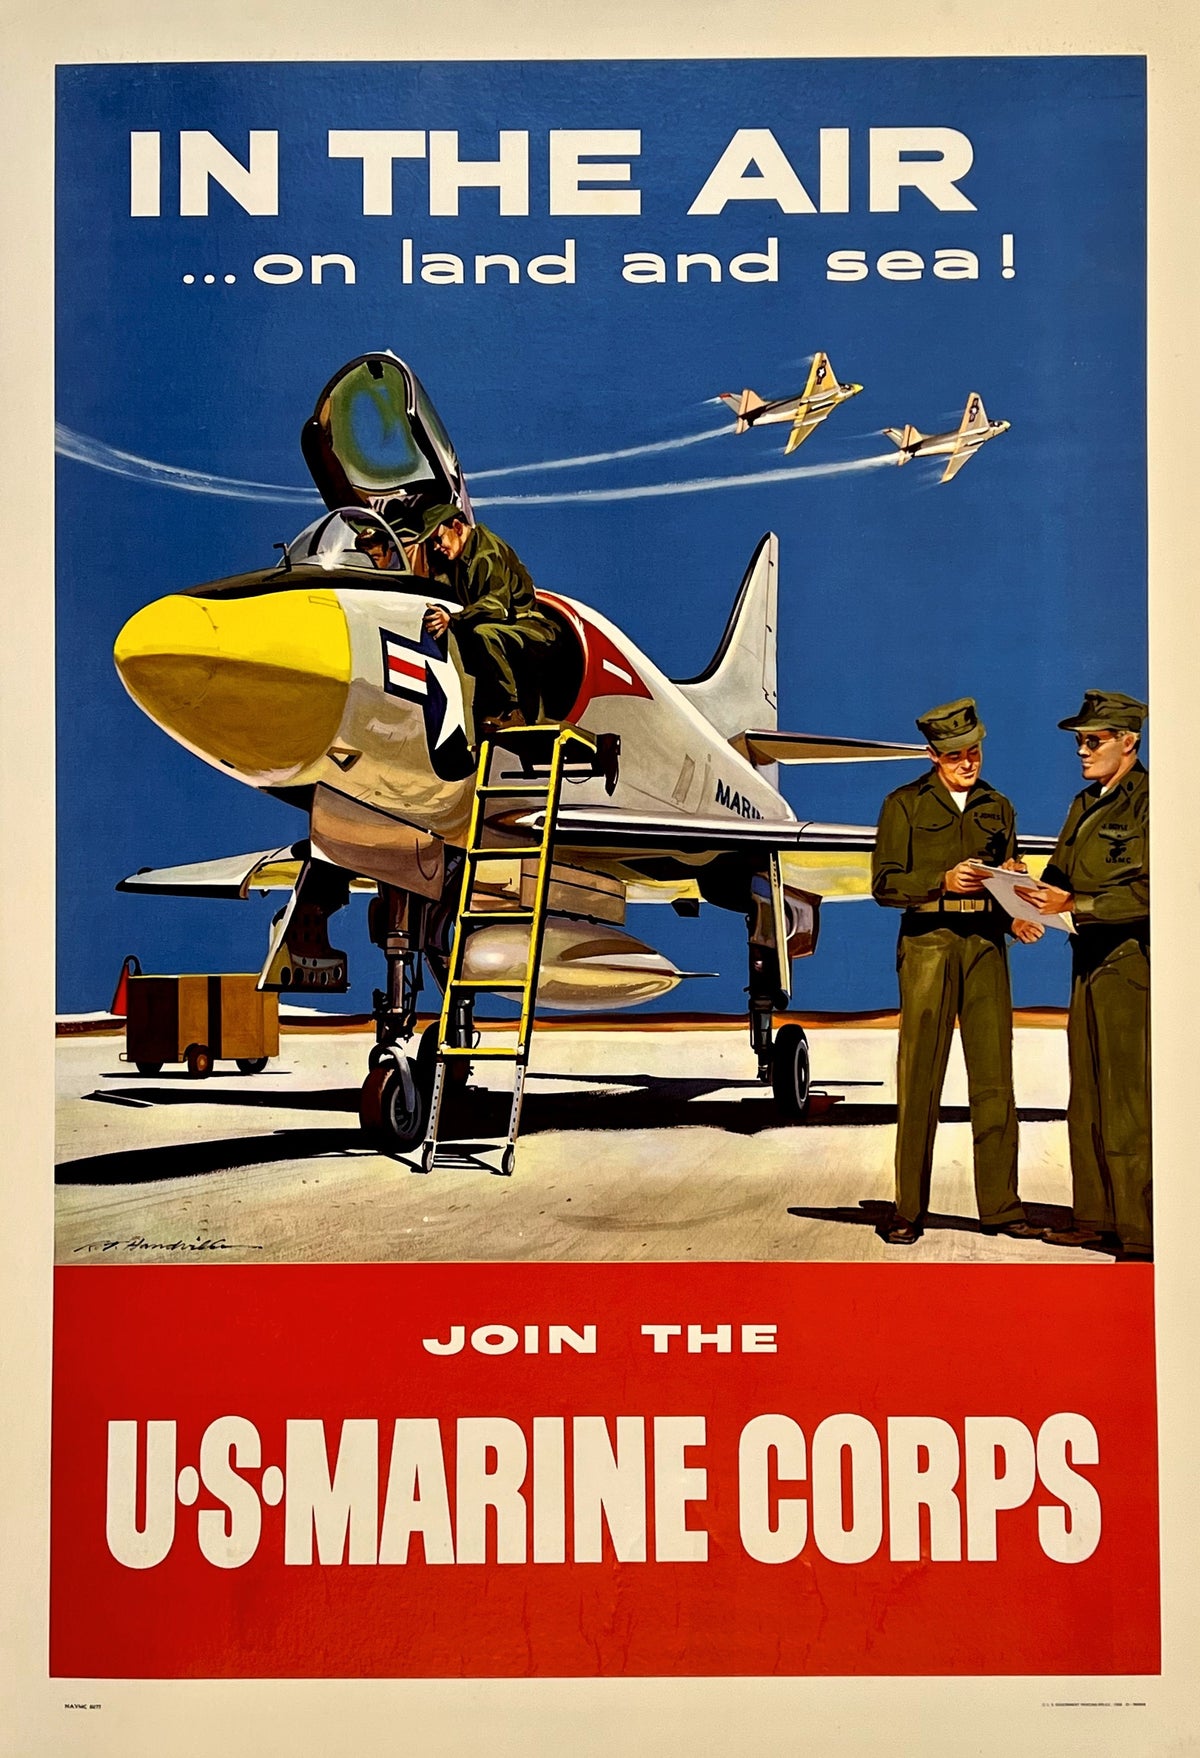 US MARINE CORPS - Authentic Vintage Poster